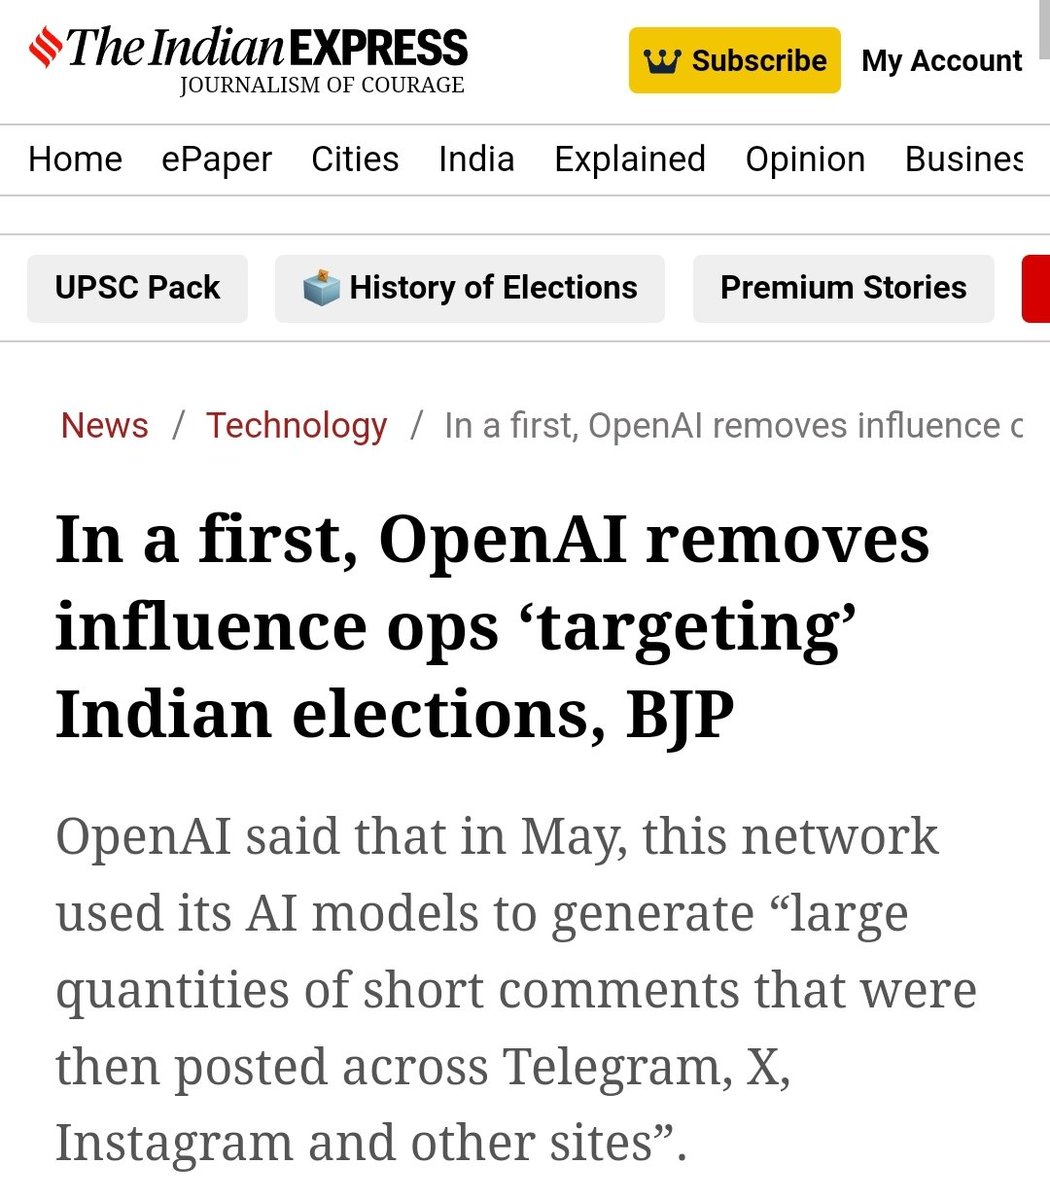 OpenAI (ChatGPT) has claimed that they disrupted a covert influence campaign to influence Indian elections. This was being done by an Israeli company STOIC and the aim was spread pro-Congress and anti-Bharatiya Janata Party (BJP) content. OpenAI's AI models were used to